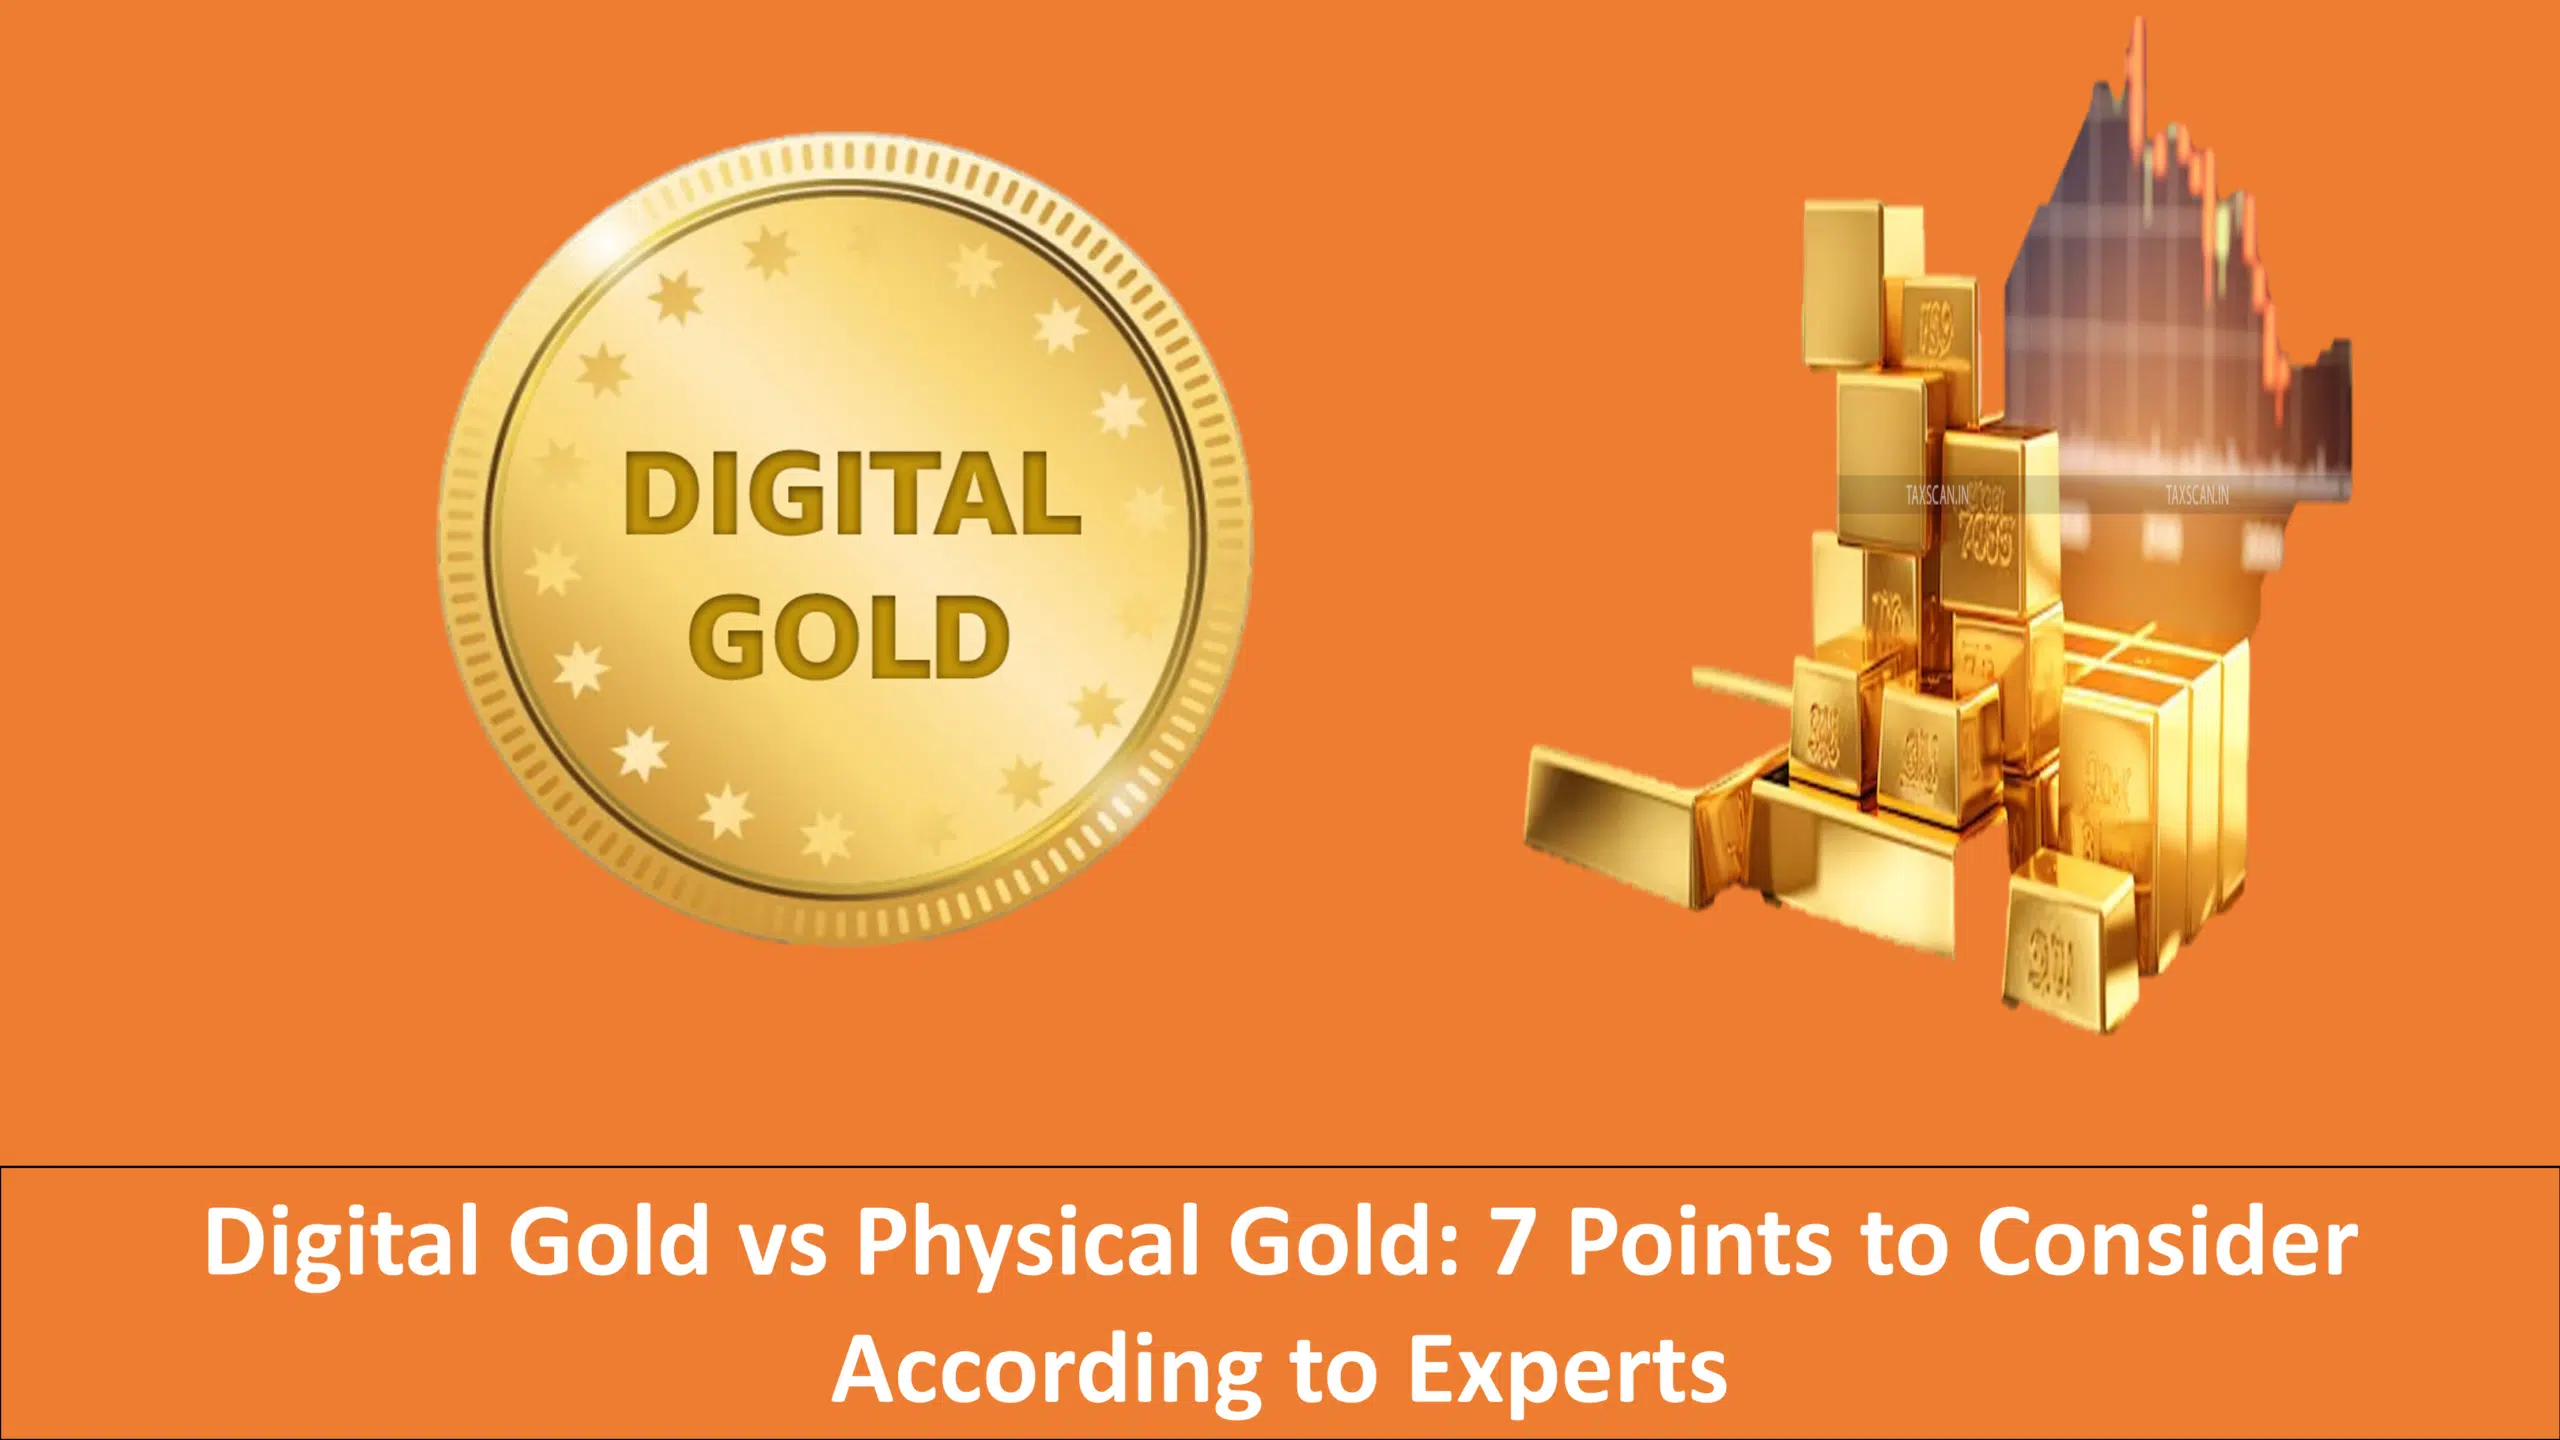 Digital Gold vs Physical Gold: 7 Points to Consider According to Experts